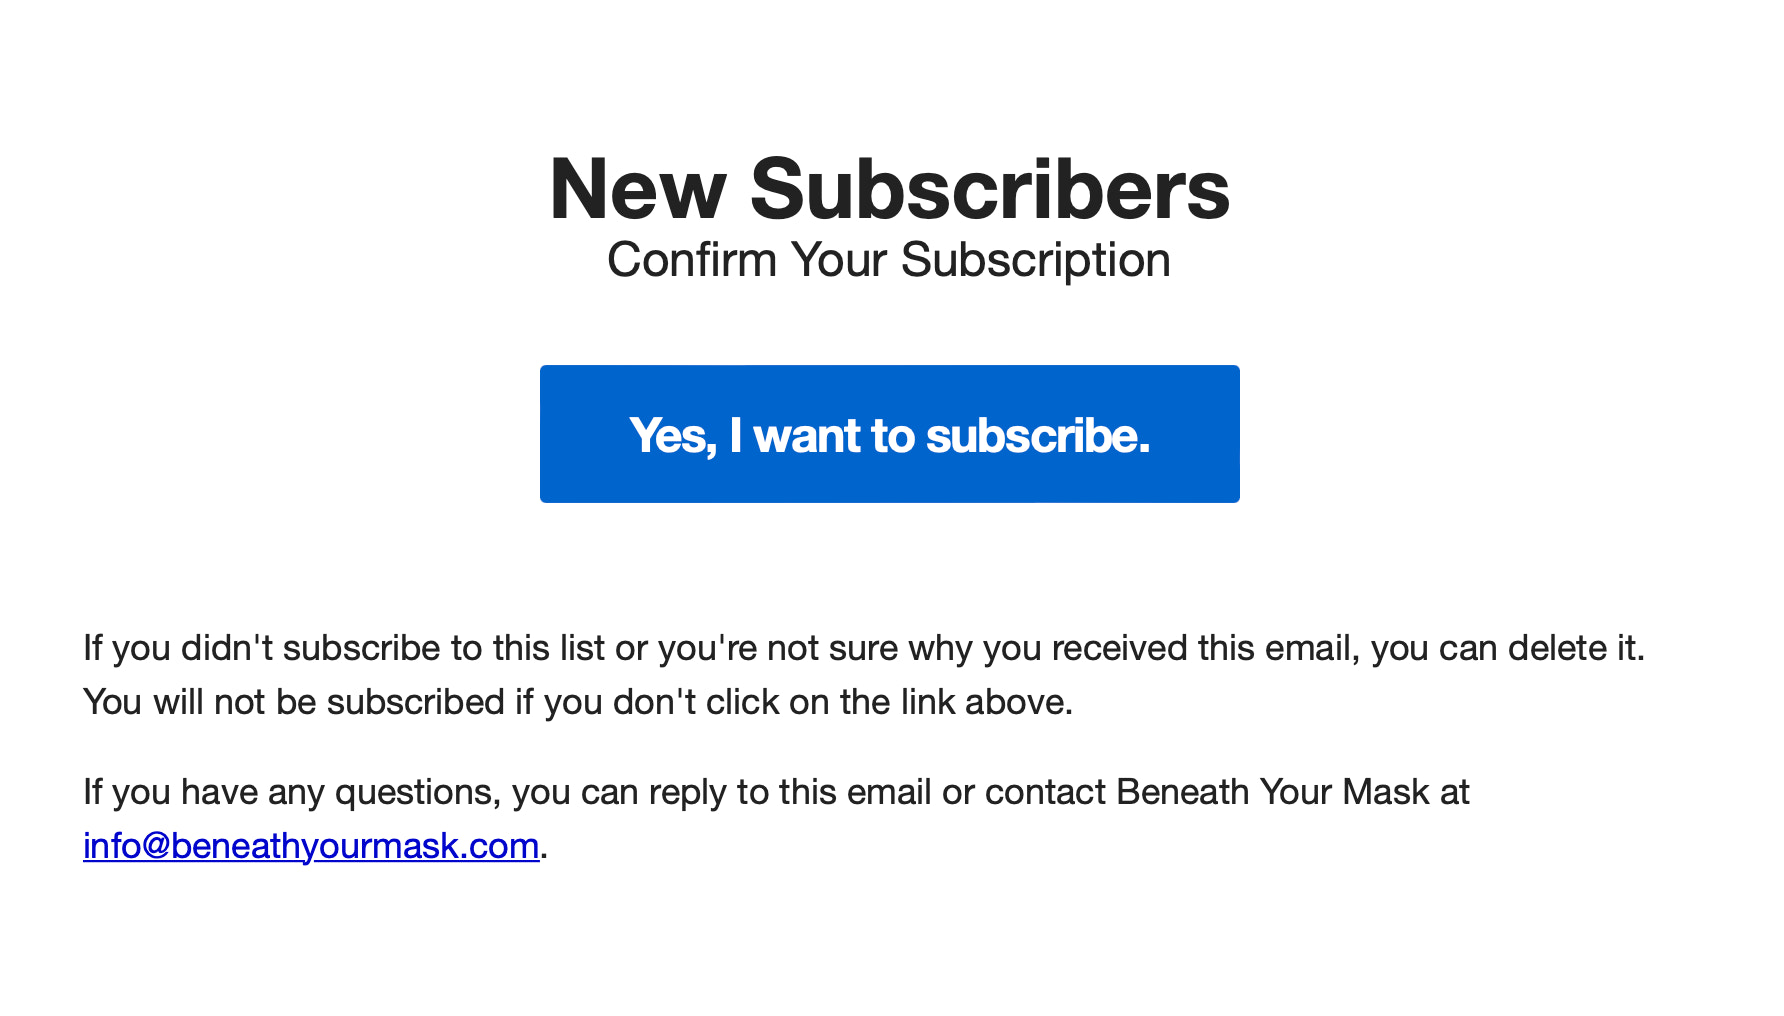 Beneath Your Mask uses double opt-in email before adding a new subscriber to their list